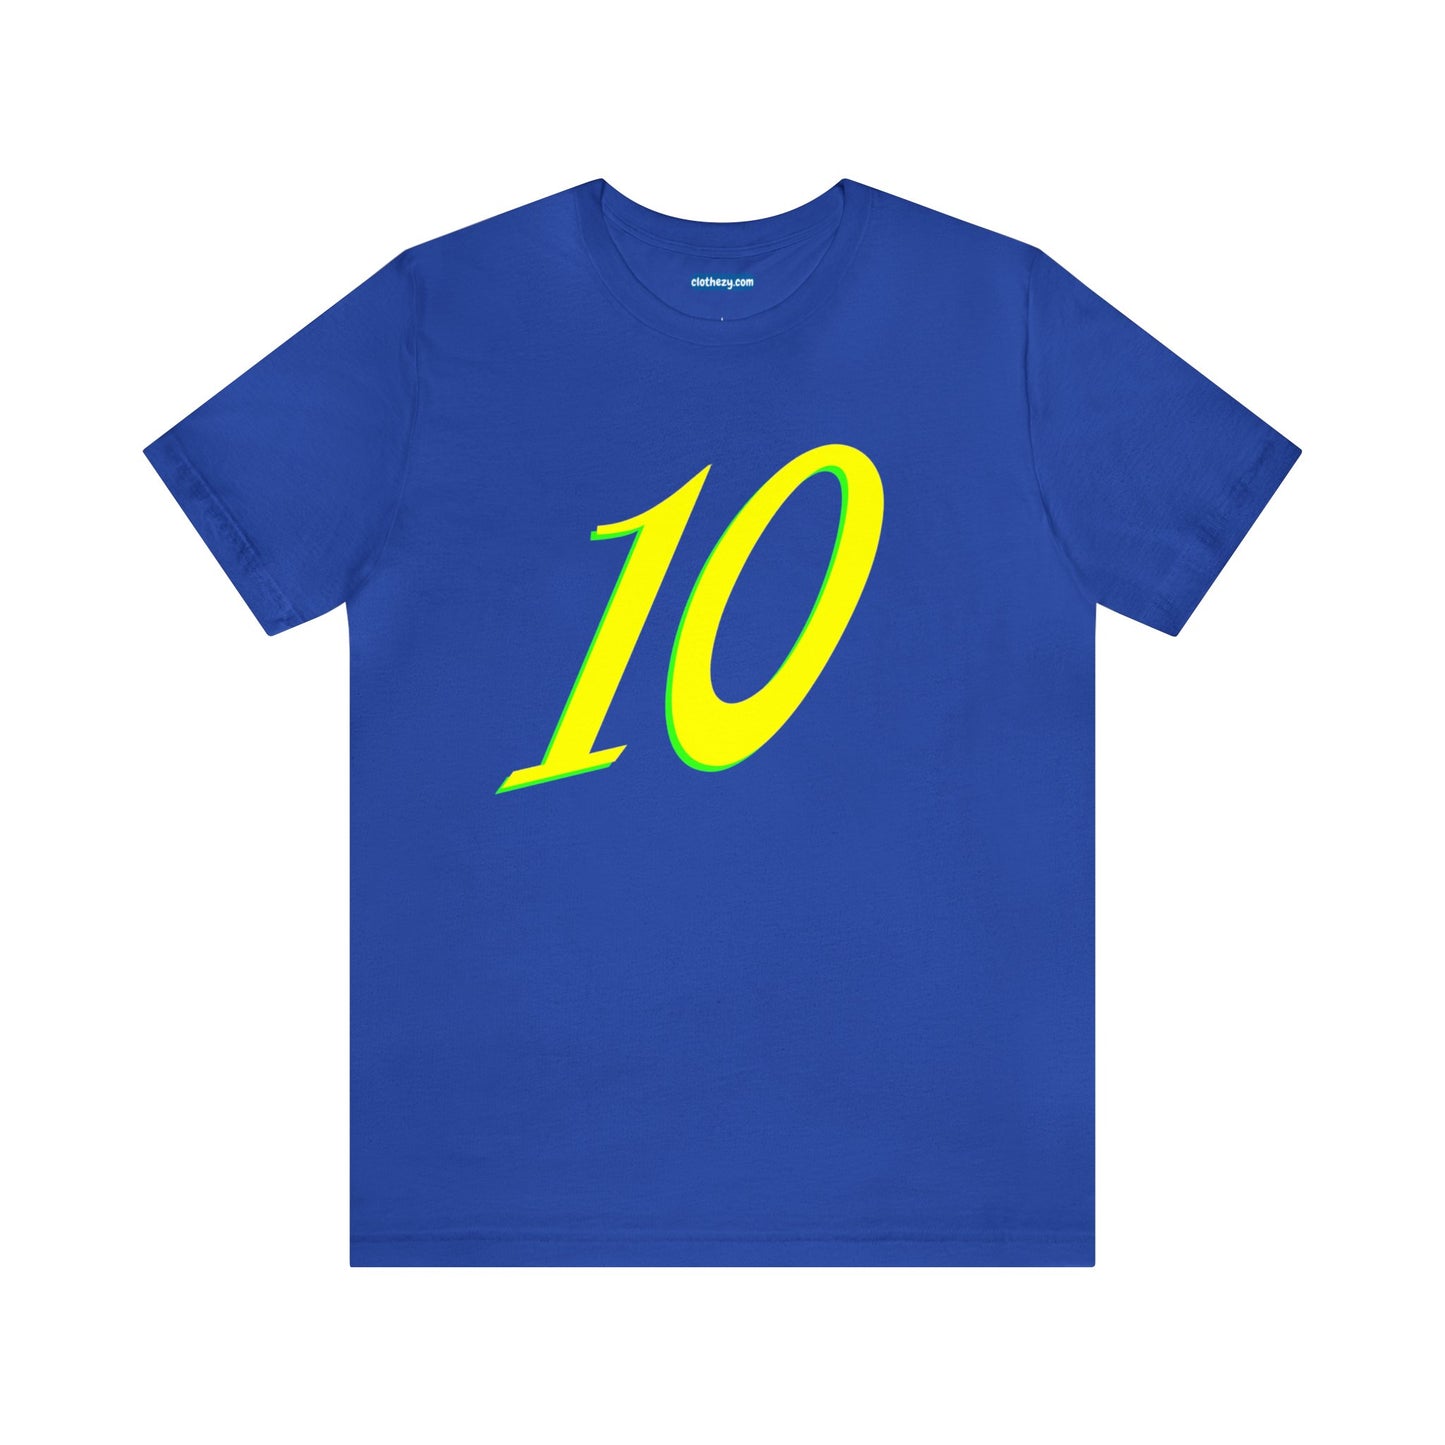 Number 10 Design - Soft Cotton Tee for birthdays and celebrations, Gift for friends and family, Multiple Options by clothezy.com in Royal Blue Size Small - Buy Now